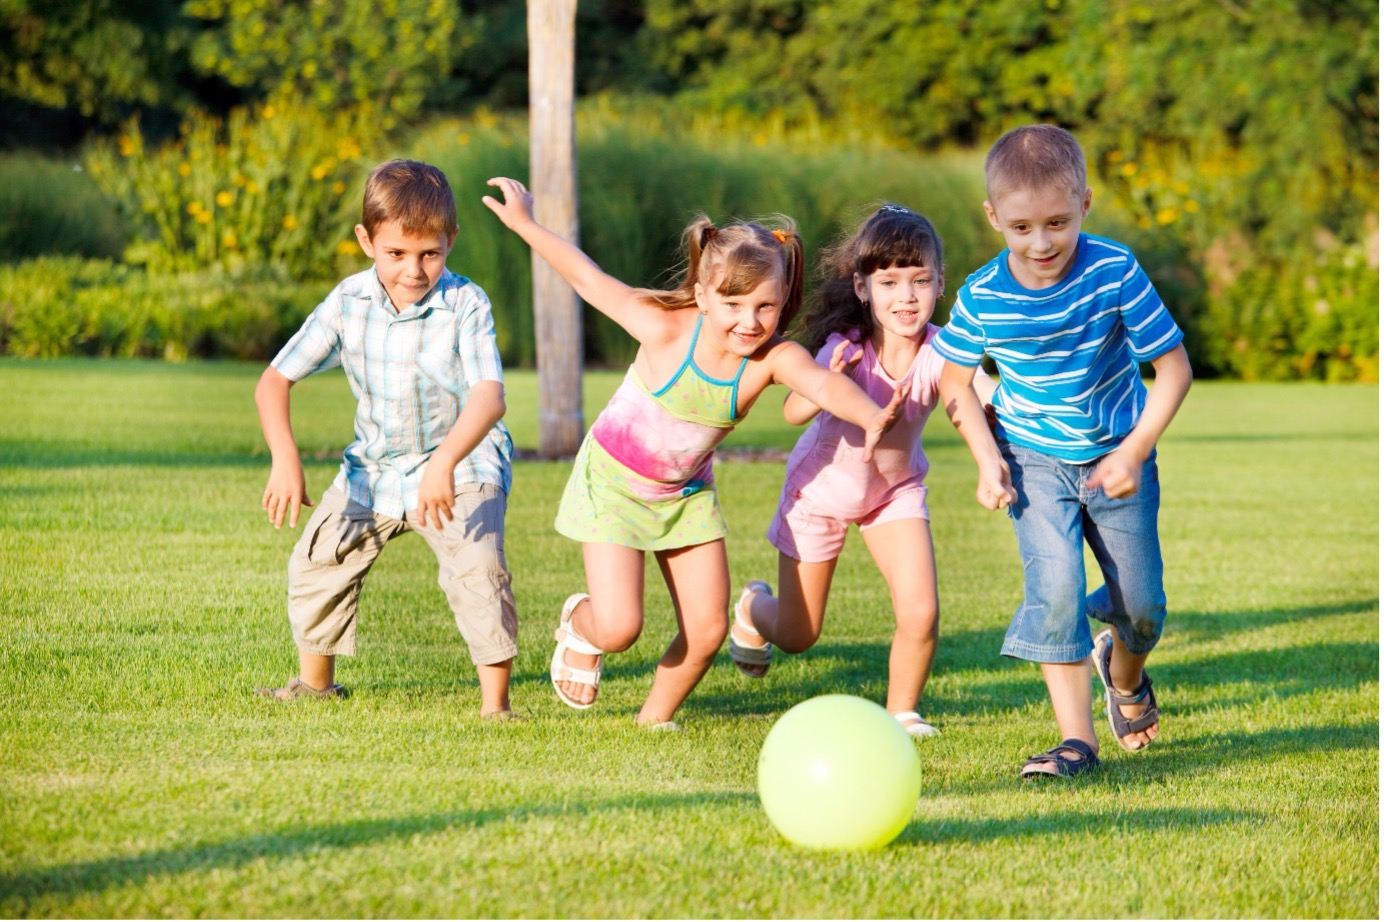 Young children running after a ball outside on the grass.